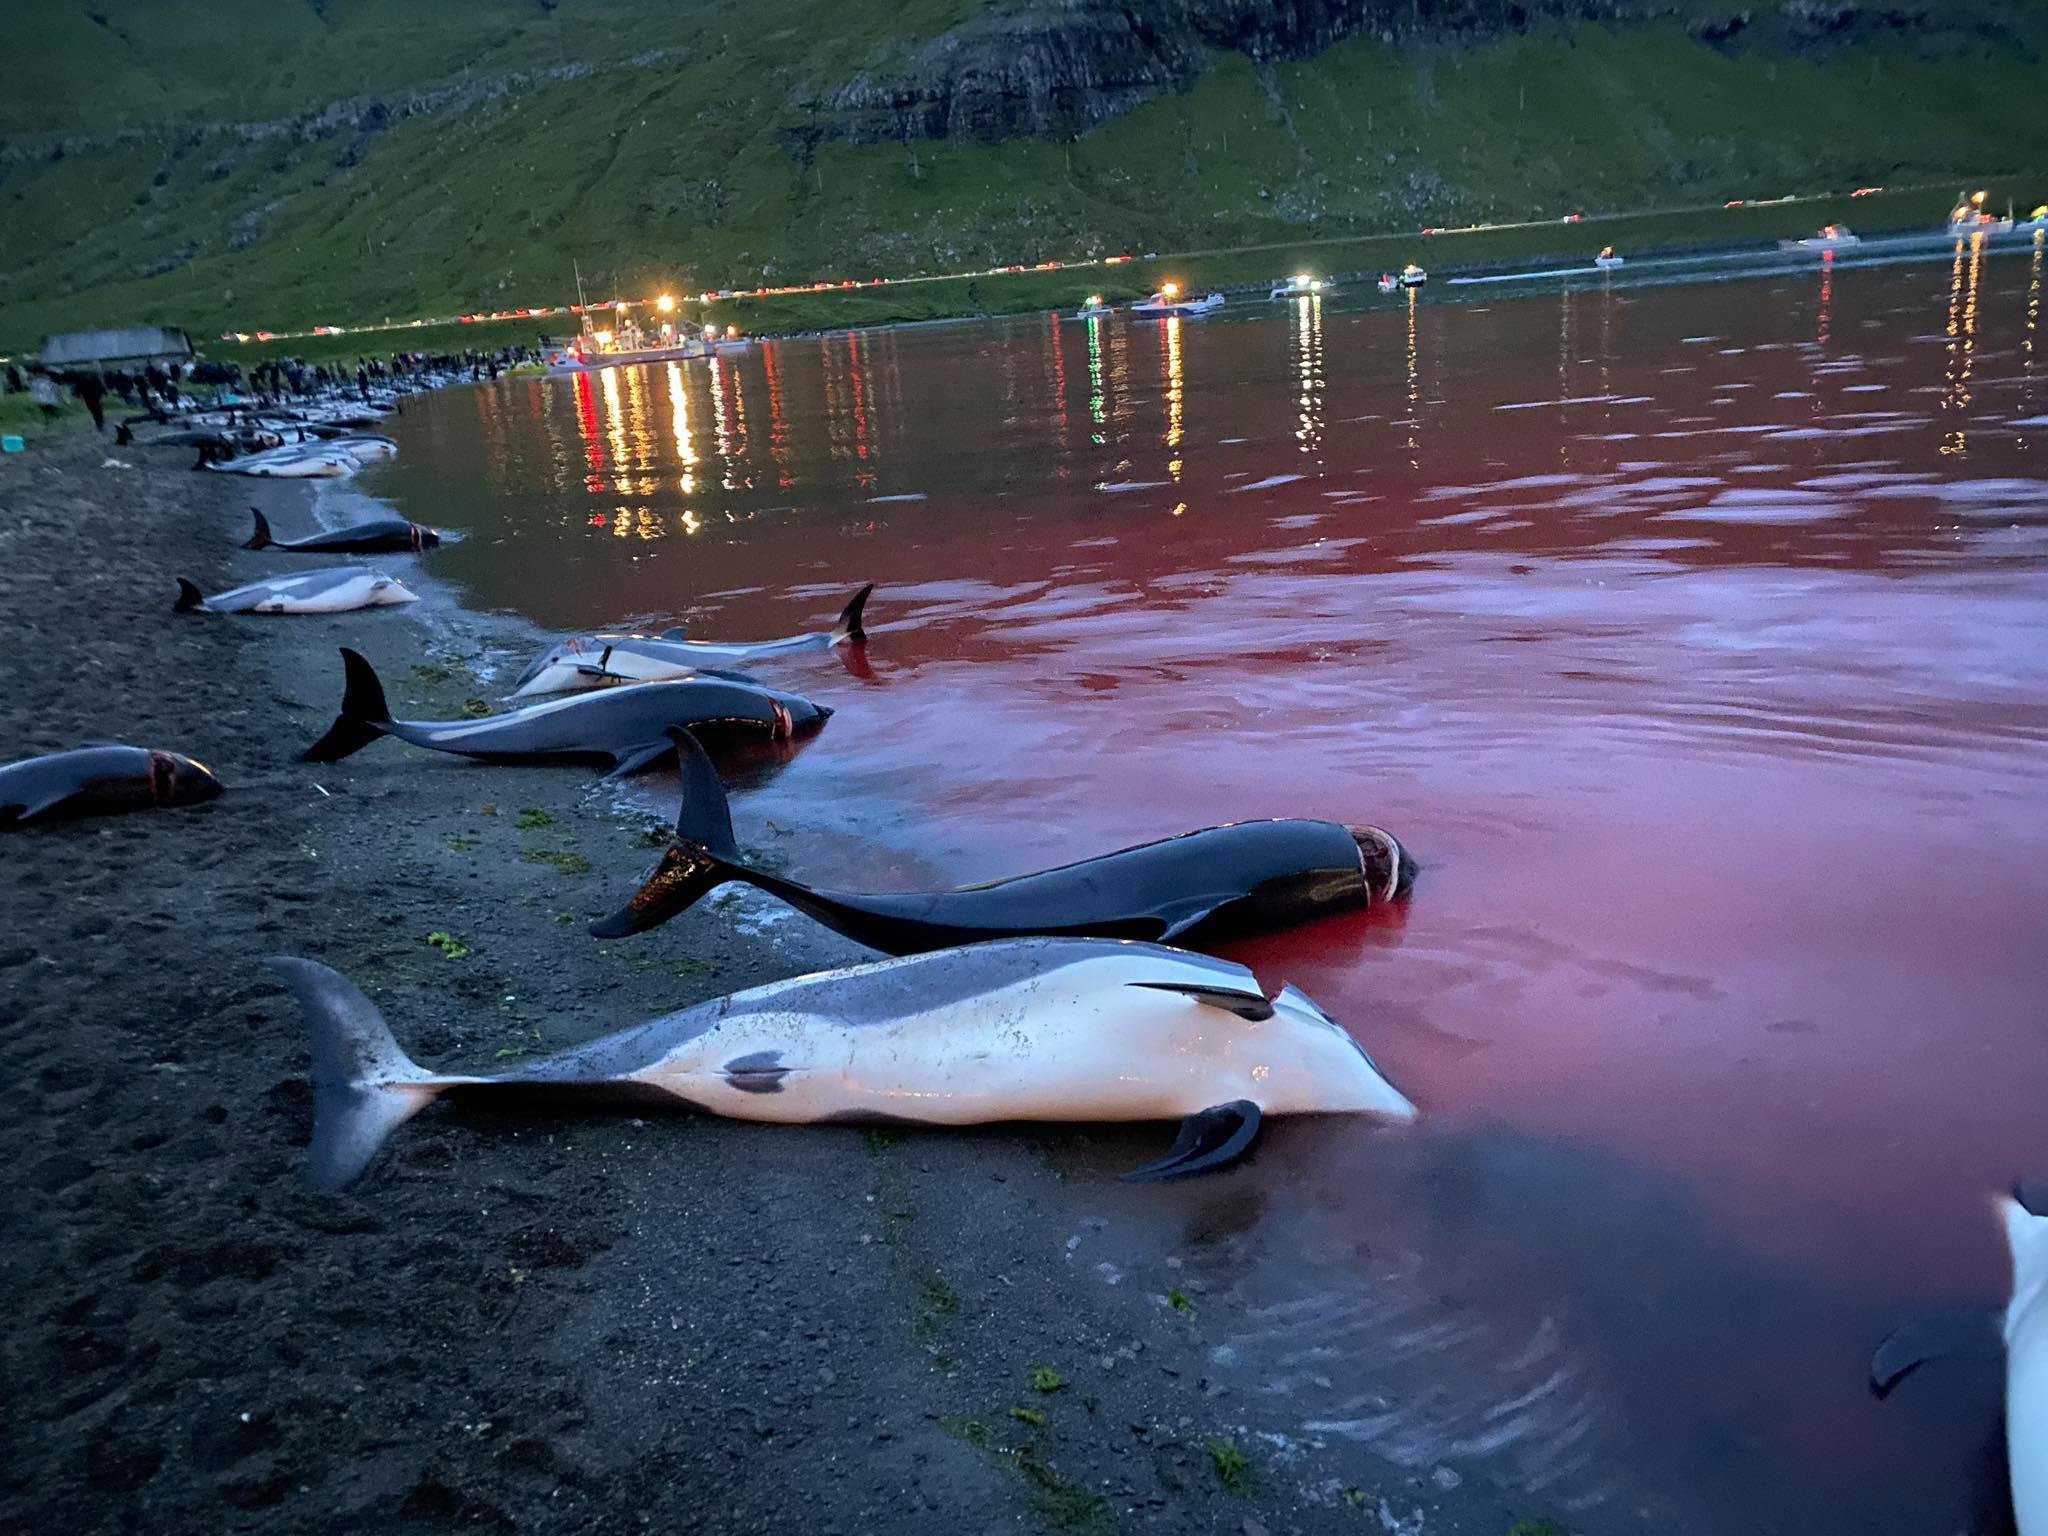 The carcasses of dead white-sided dolphins lie on a beach after being pulled from the blood-stained water on the island of Eysturoy, part of the Faeroe Islands, Sept. 12, 2021. (Sea Shepherd via AP)